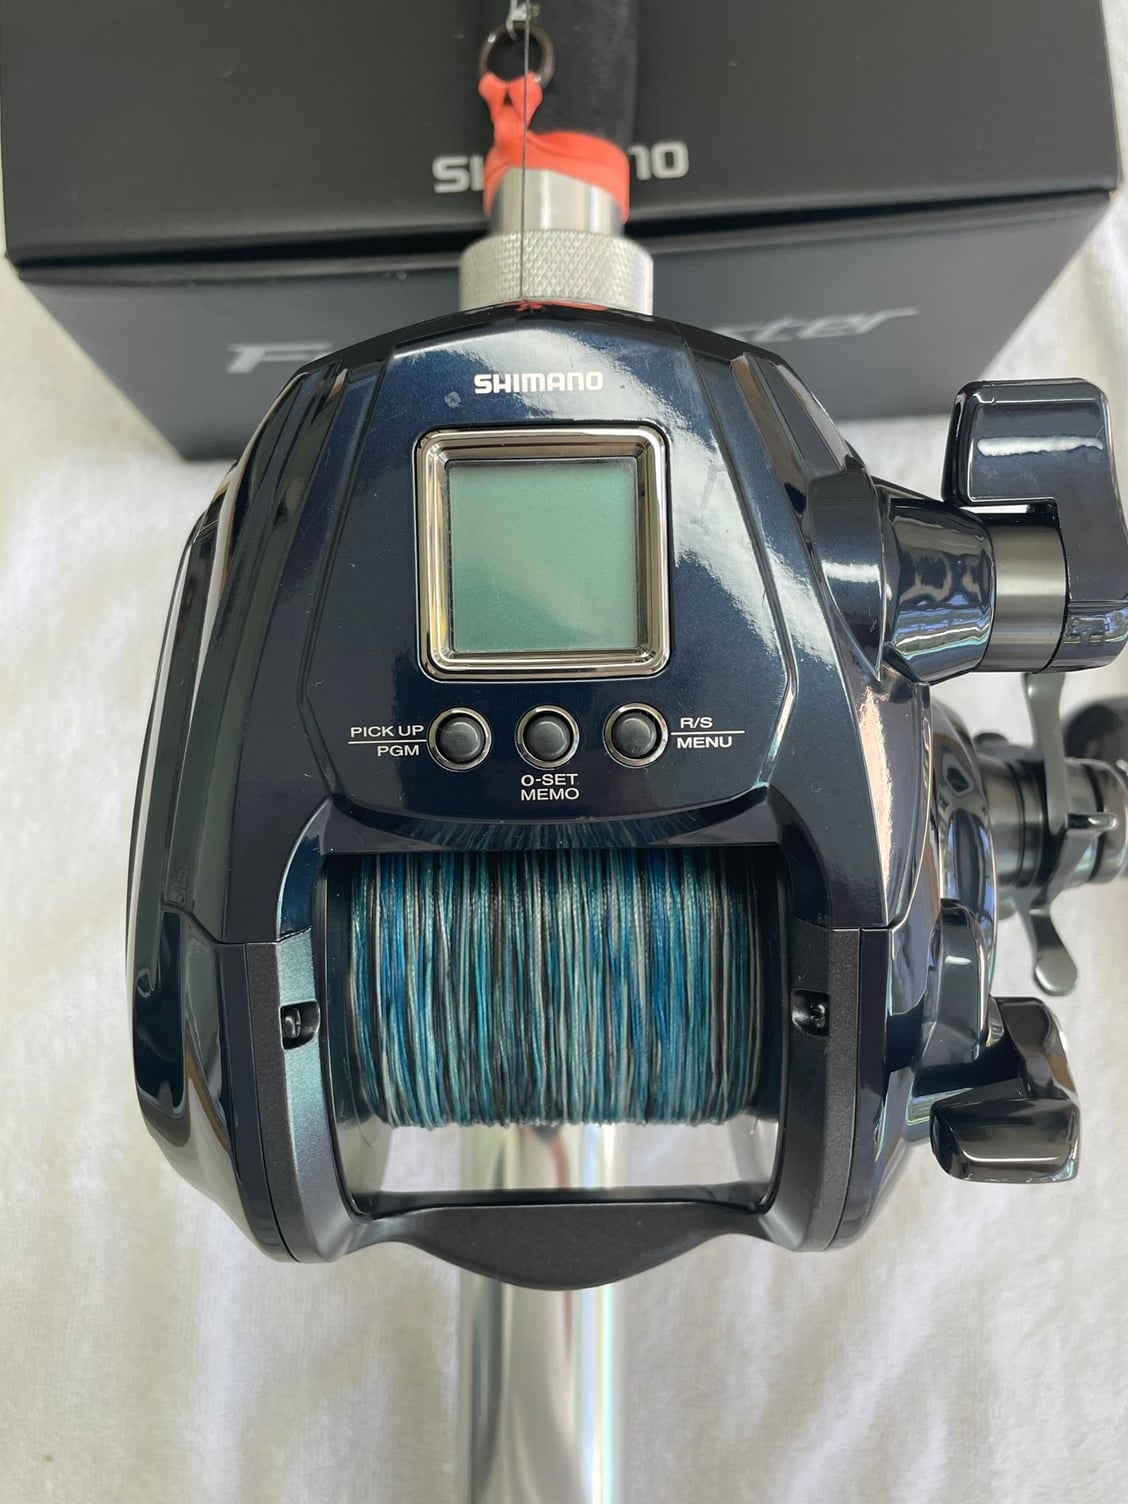 Shimano ForceMaster Electric Reel (BeastMaster) with Daiwa Dendoh Bent Rod  - $1050 - The Hull Truth - Boating and Fishing Forum